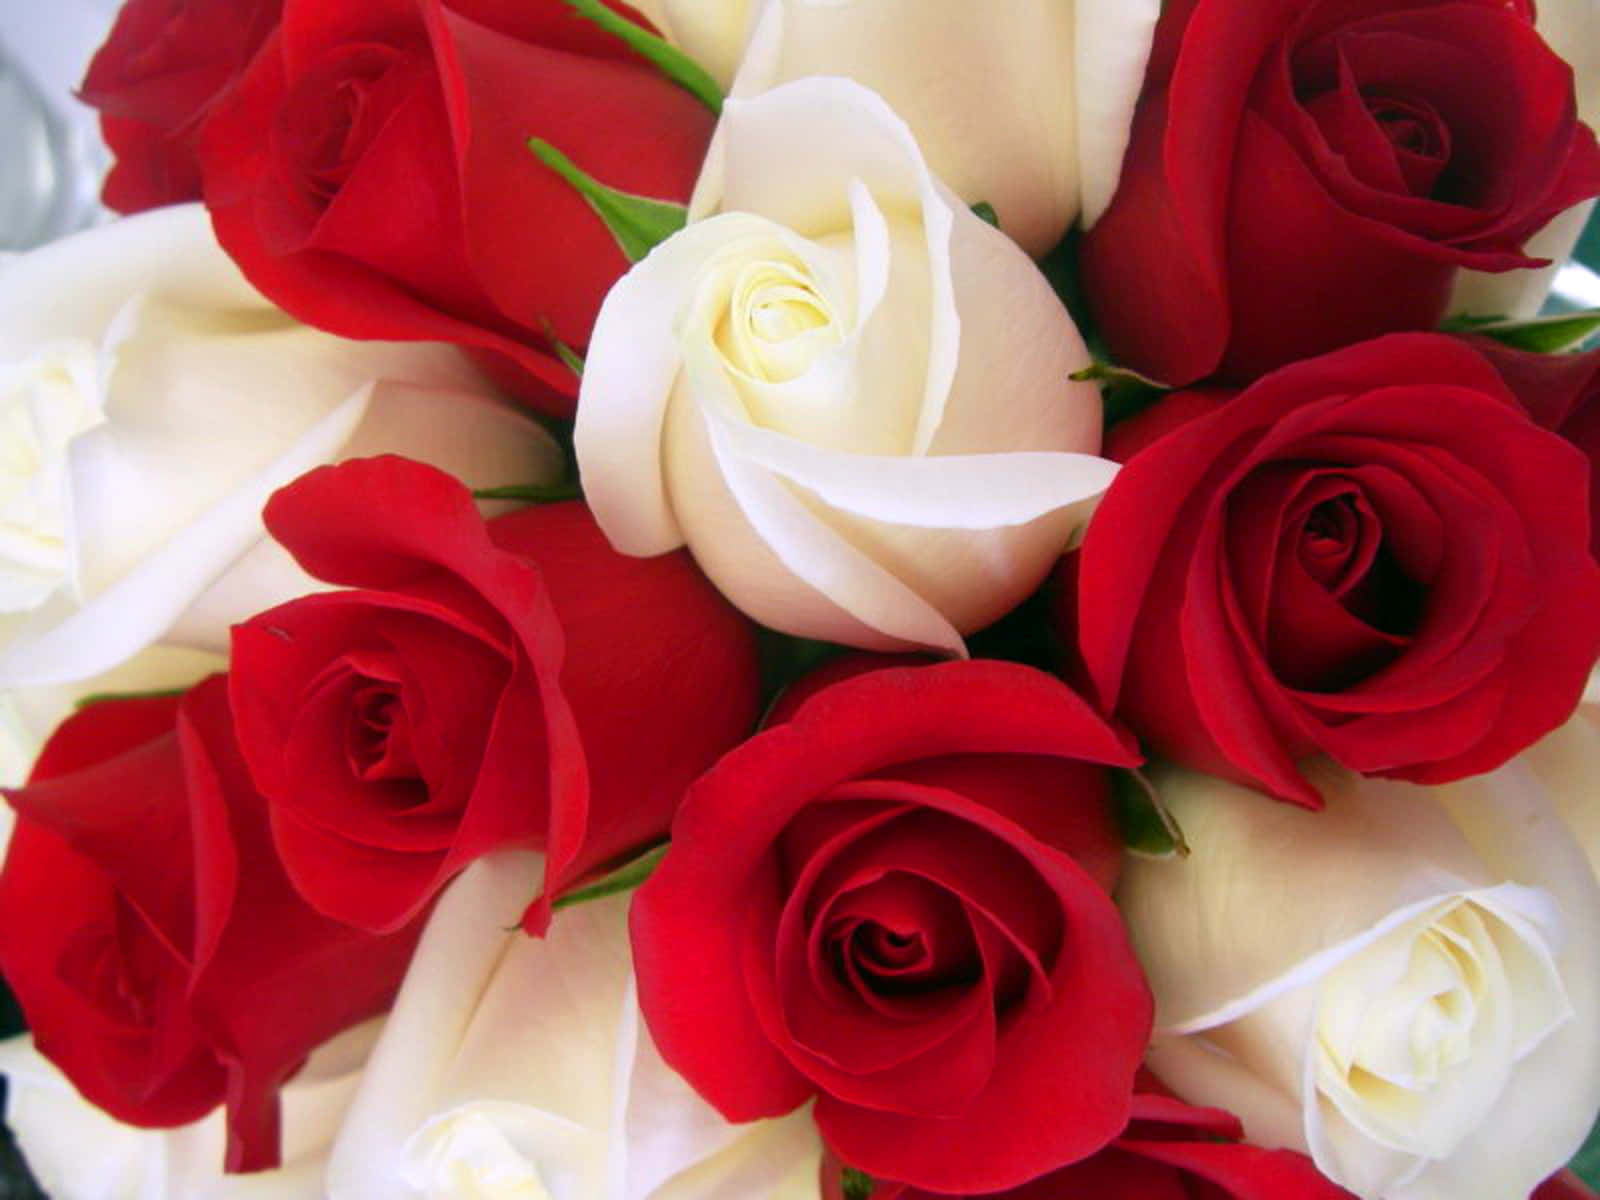 "A Bouquet of Beautiful Roses" Wallpaper